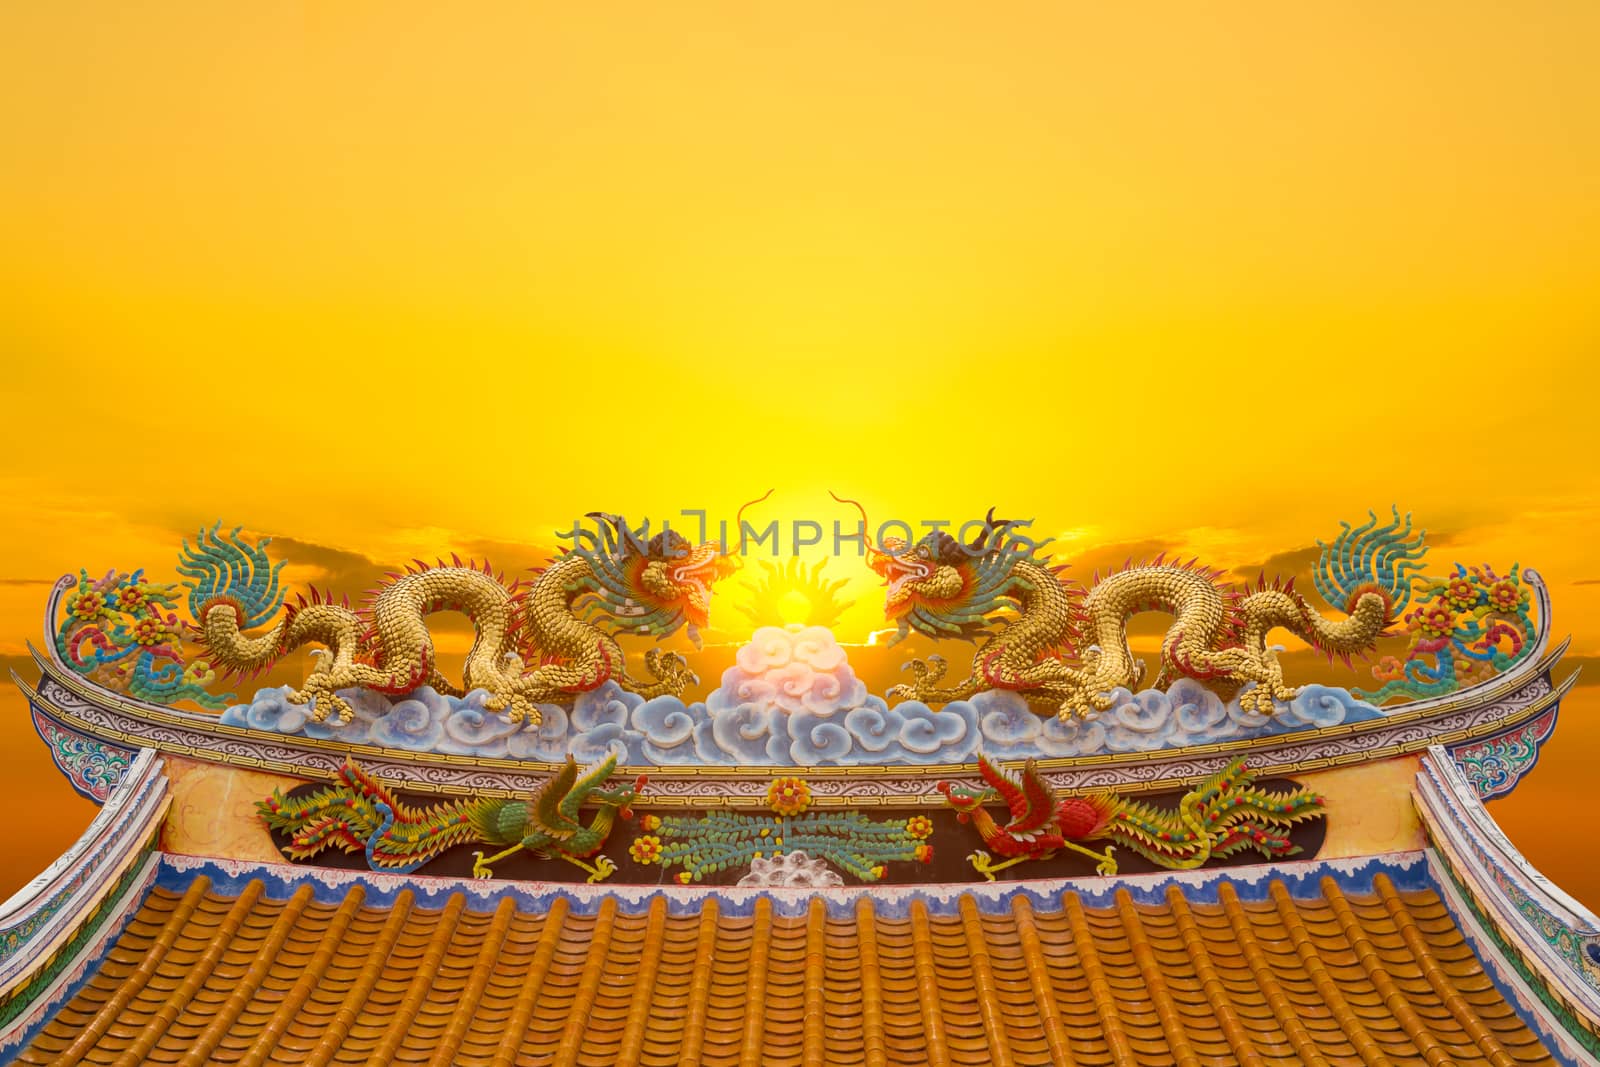 Beautiful chinese dragon statue with sun light background.